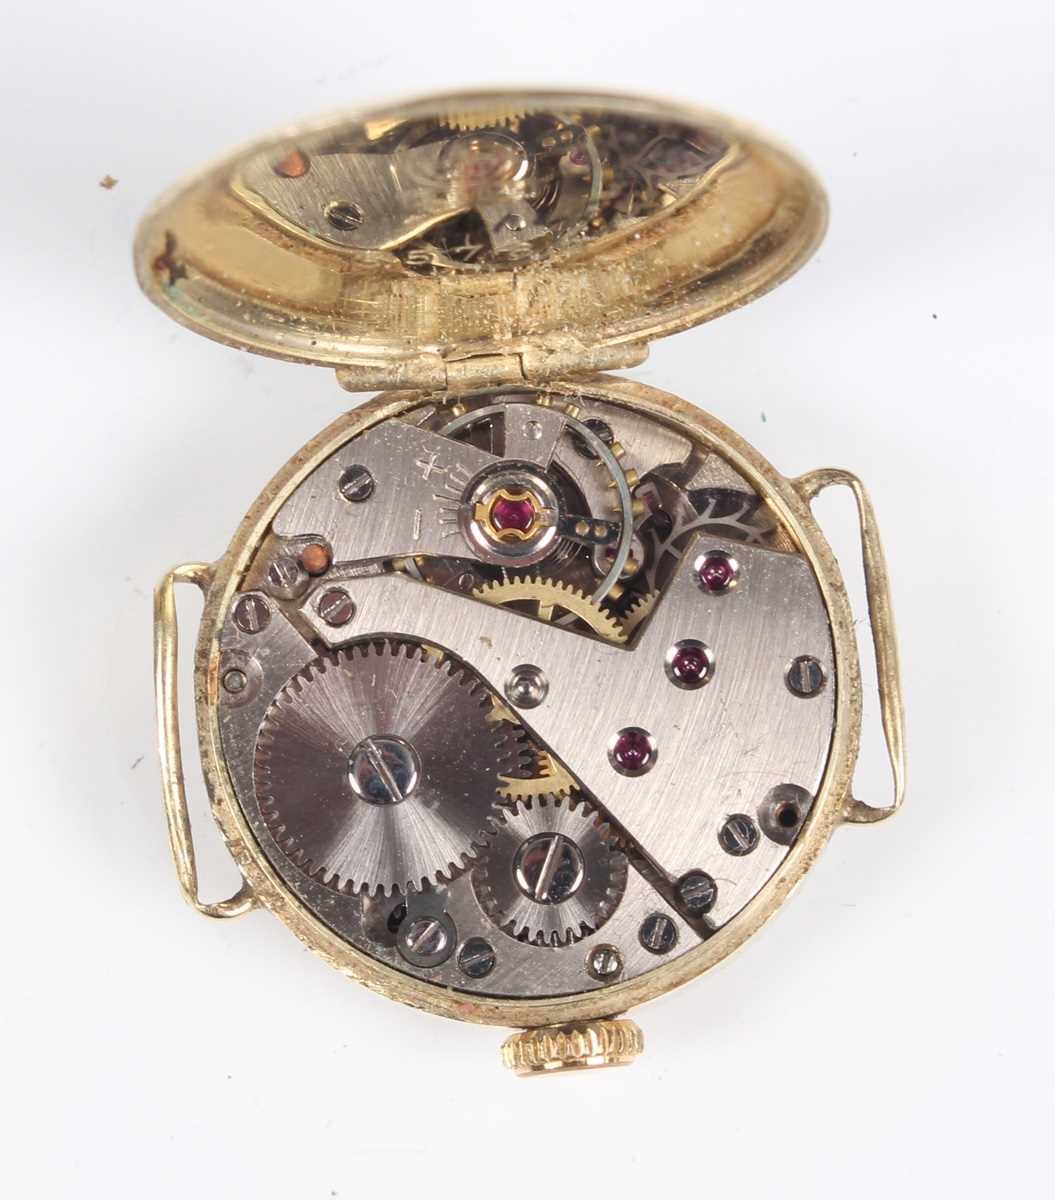 A Stowa gold circular cased lady’s wristwatch, detailed ‘0,585’, weight 8.9g, case diameter 2.1cm, - Image 14 of 22